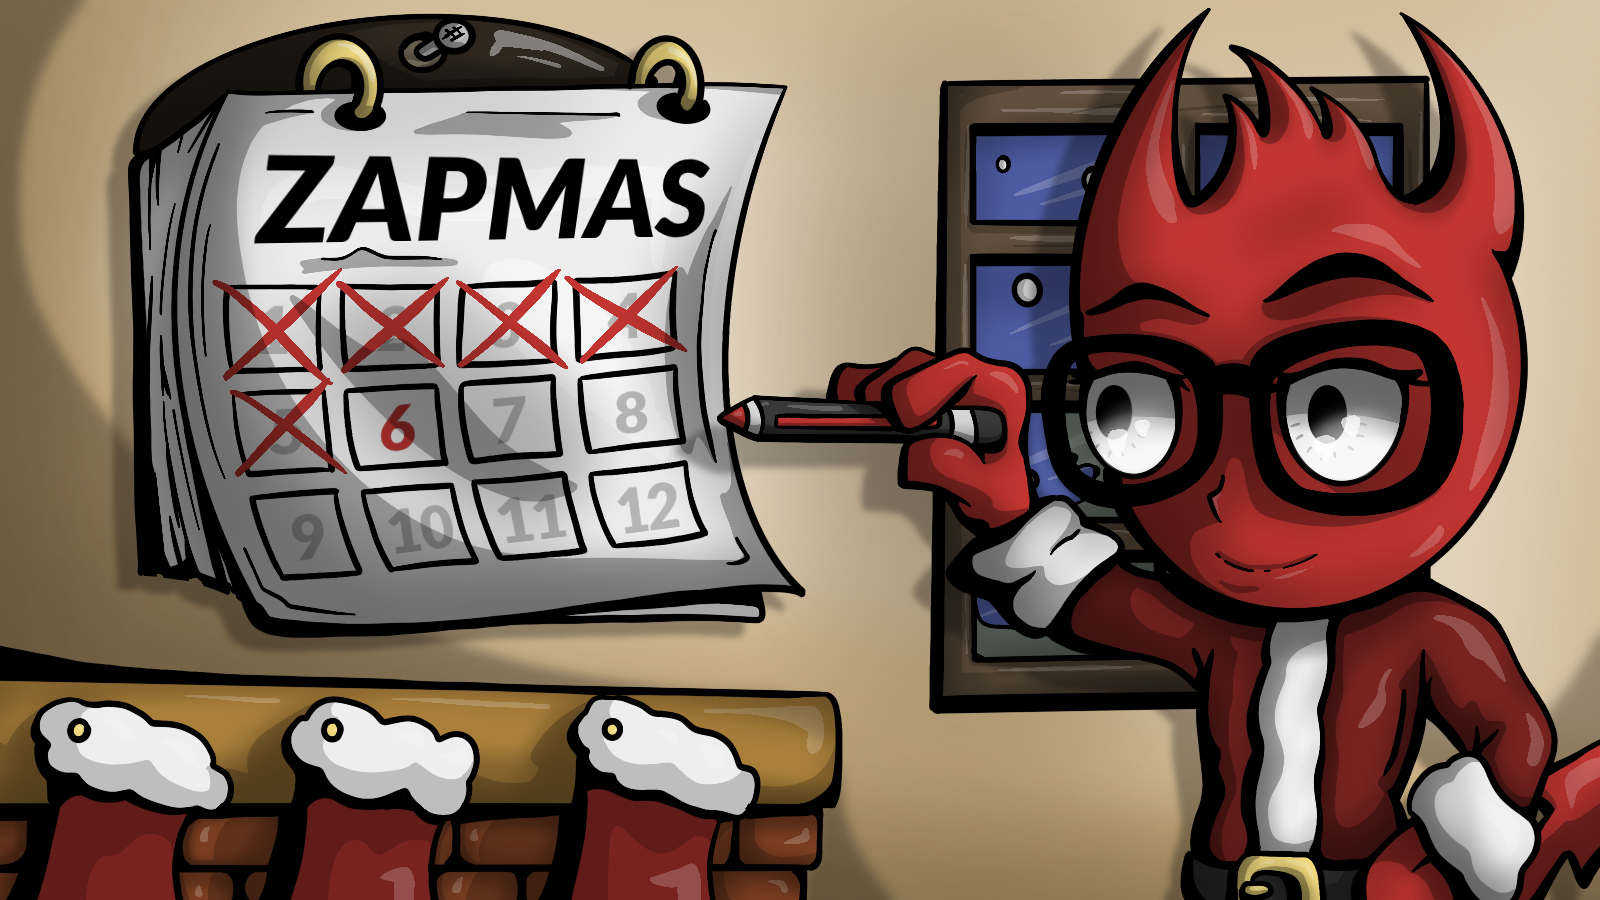 Twelve Days of ZAPMAS - Day 6 - Passive Flaw Detection and Using the HUD